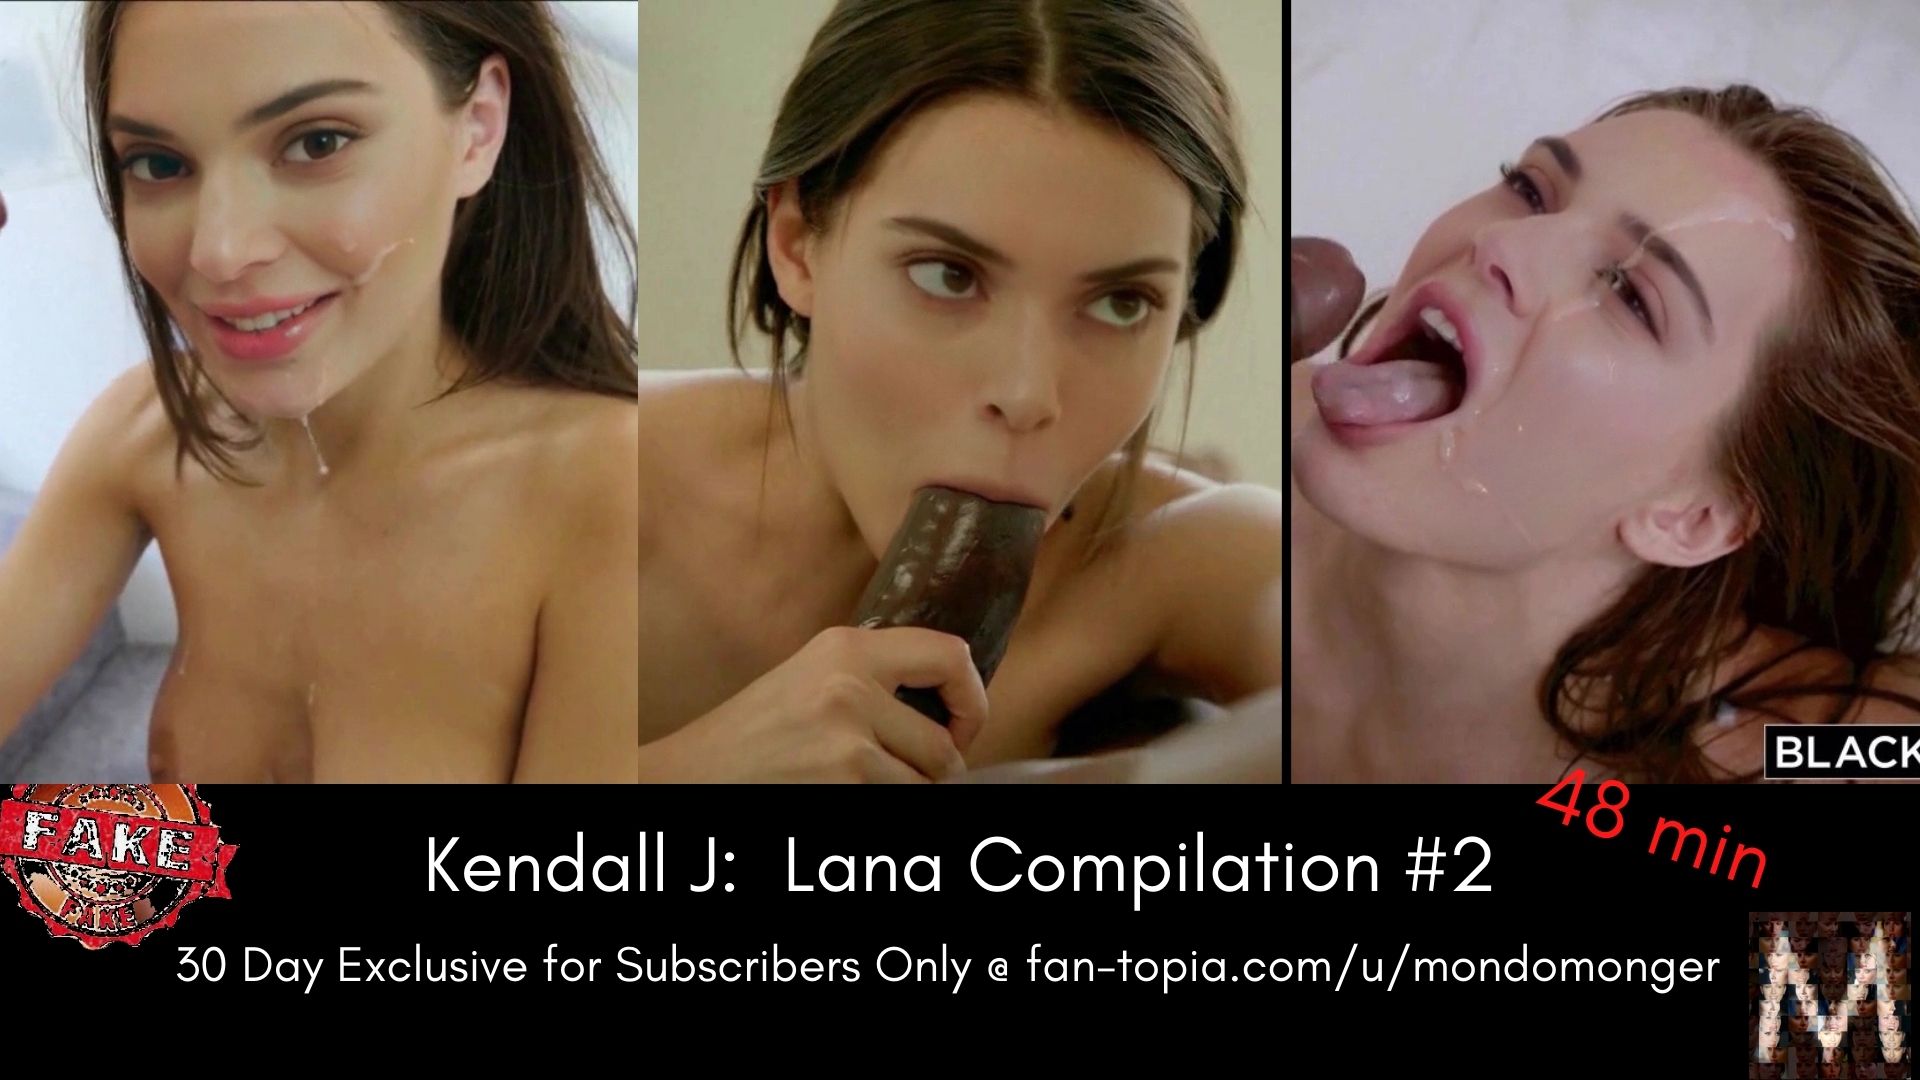 Not Kendall Jenner:  48 min Lana Rhoades Fuck and Suck #2  (Preview)